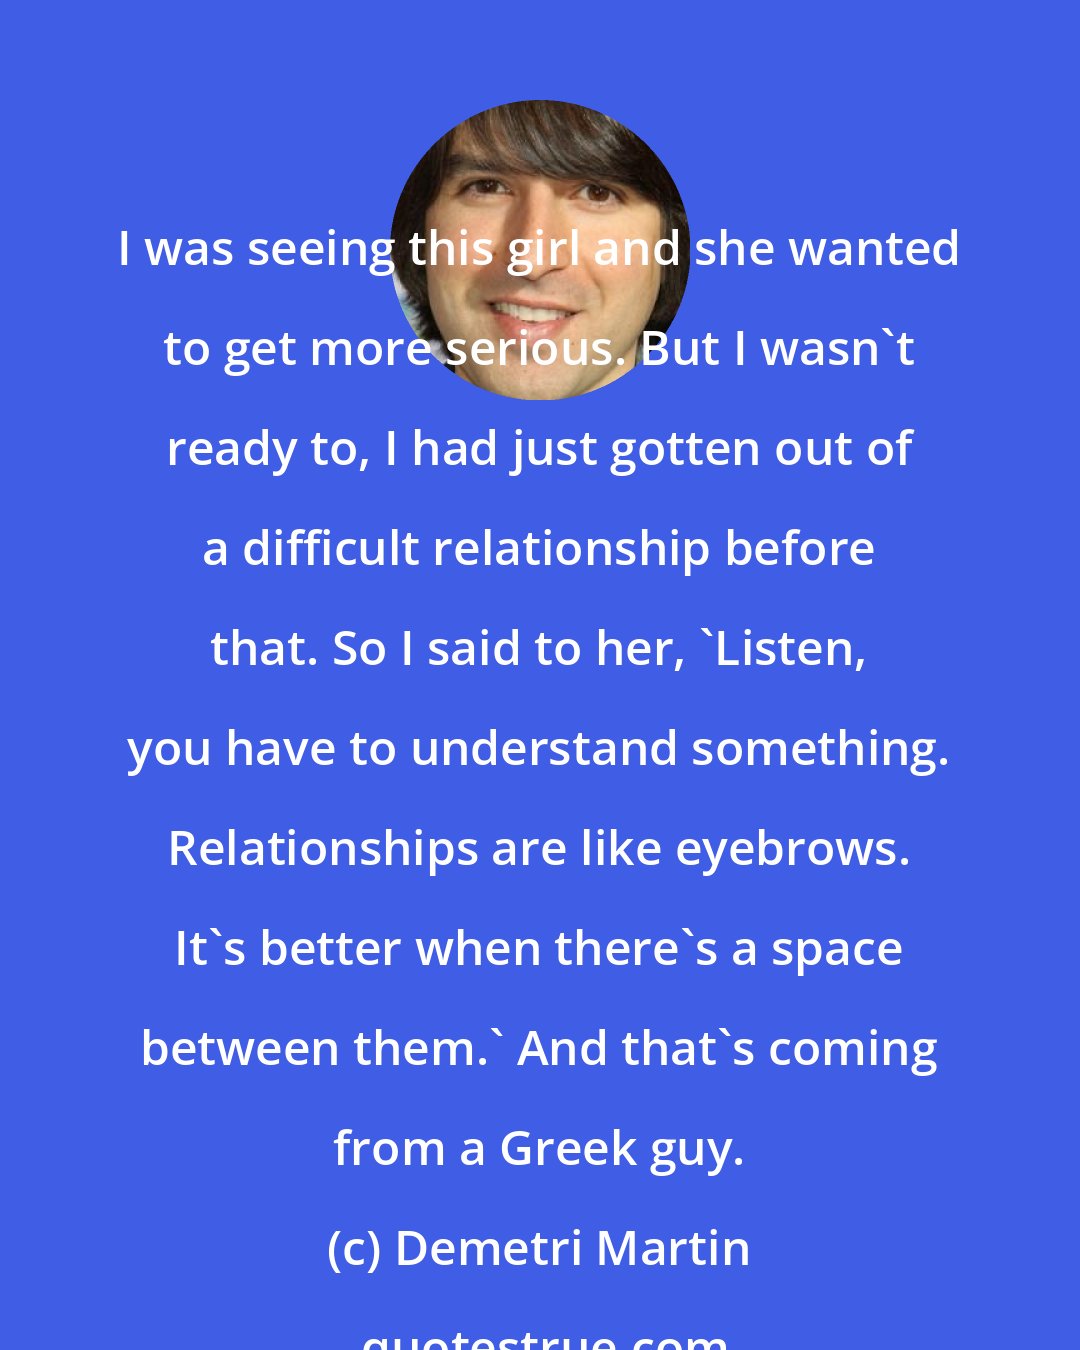 Demetri Martin: I was seeing this girl and she wanted to get more serious. But I wasn't ready to, I had just gotten out of a difficult relationship before that. So I said to her, 'Listen, you have to understand something. Relationships are like eyebrows. It's better when there's a space between them.' And that's coming from a Greek guy.